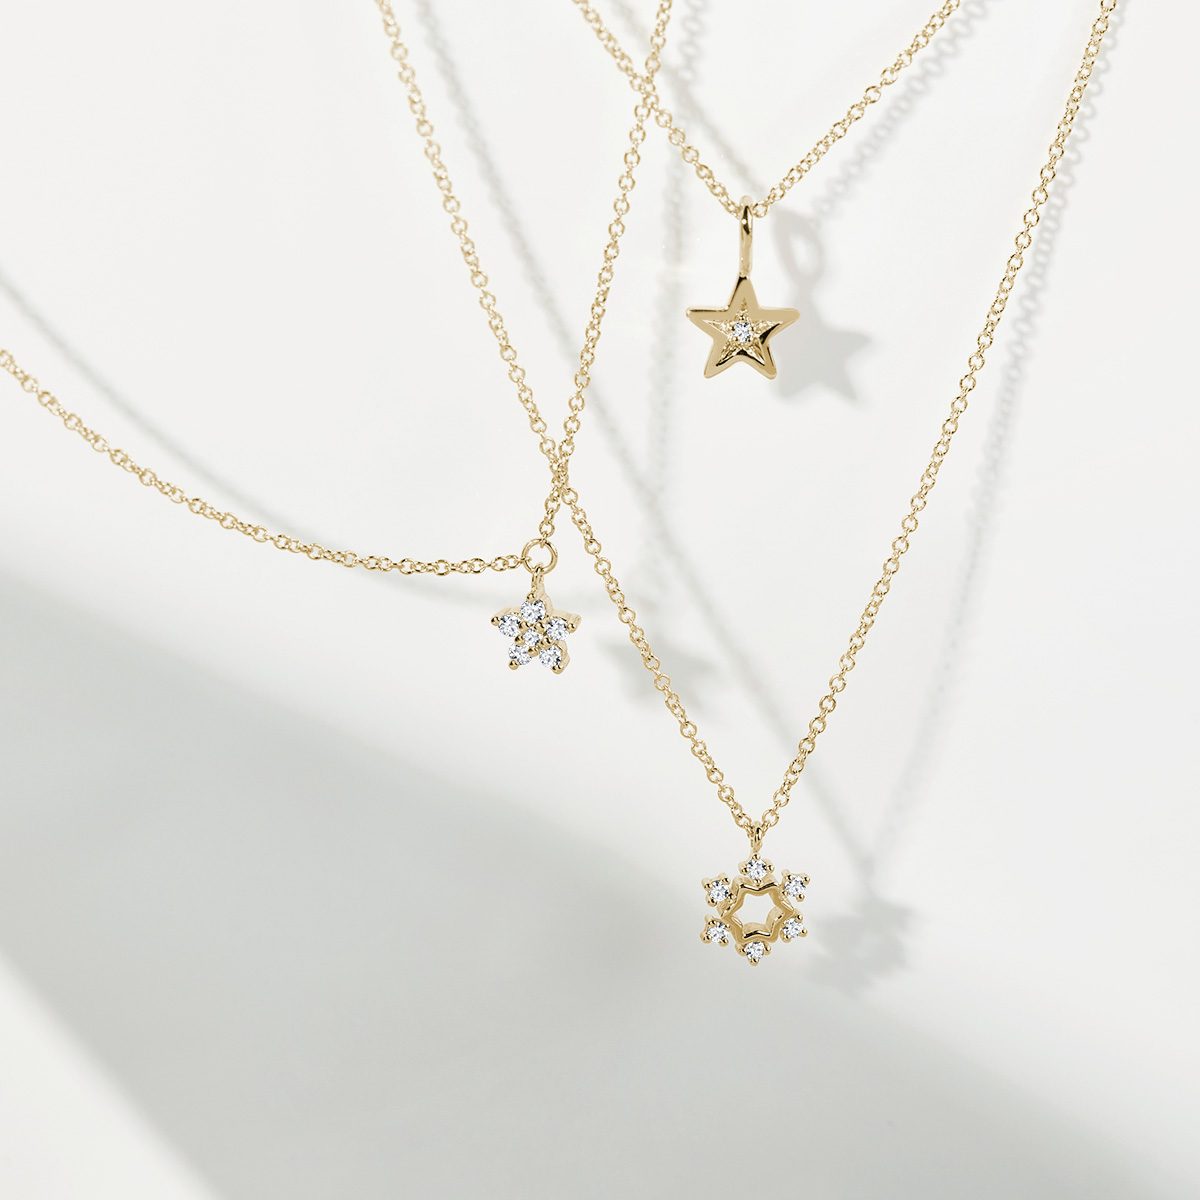 Gold necklaces with playful pendants - KLENOTA